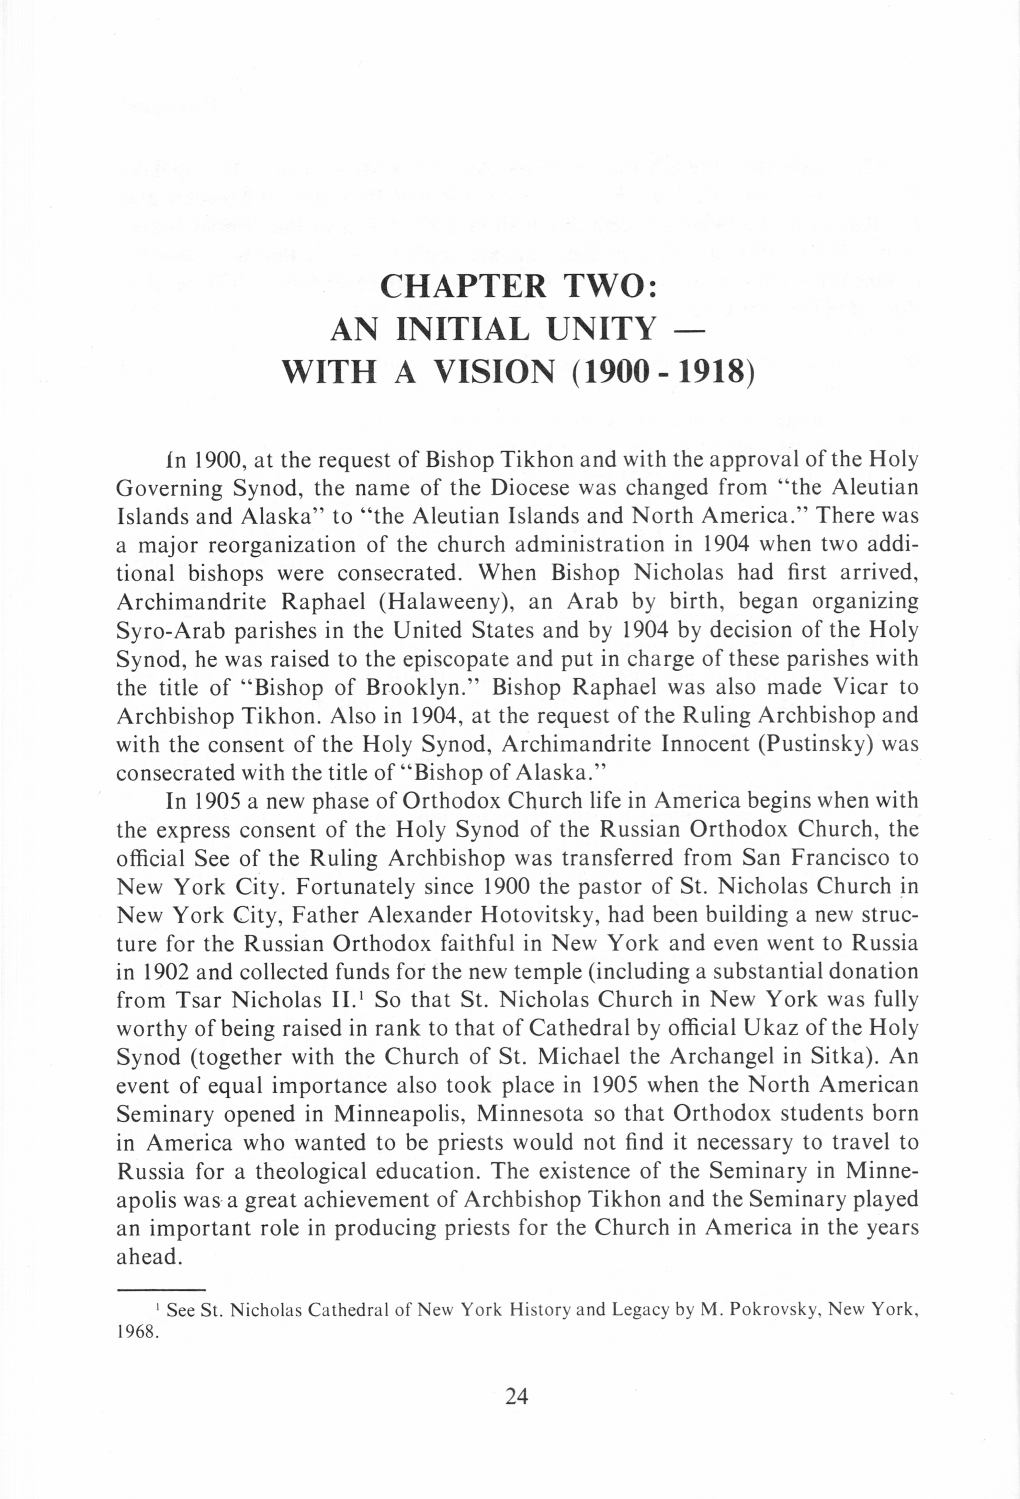 Chapter Two: an Initial Unity with a Vision (1900 - 1918)